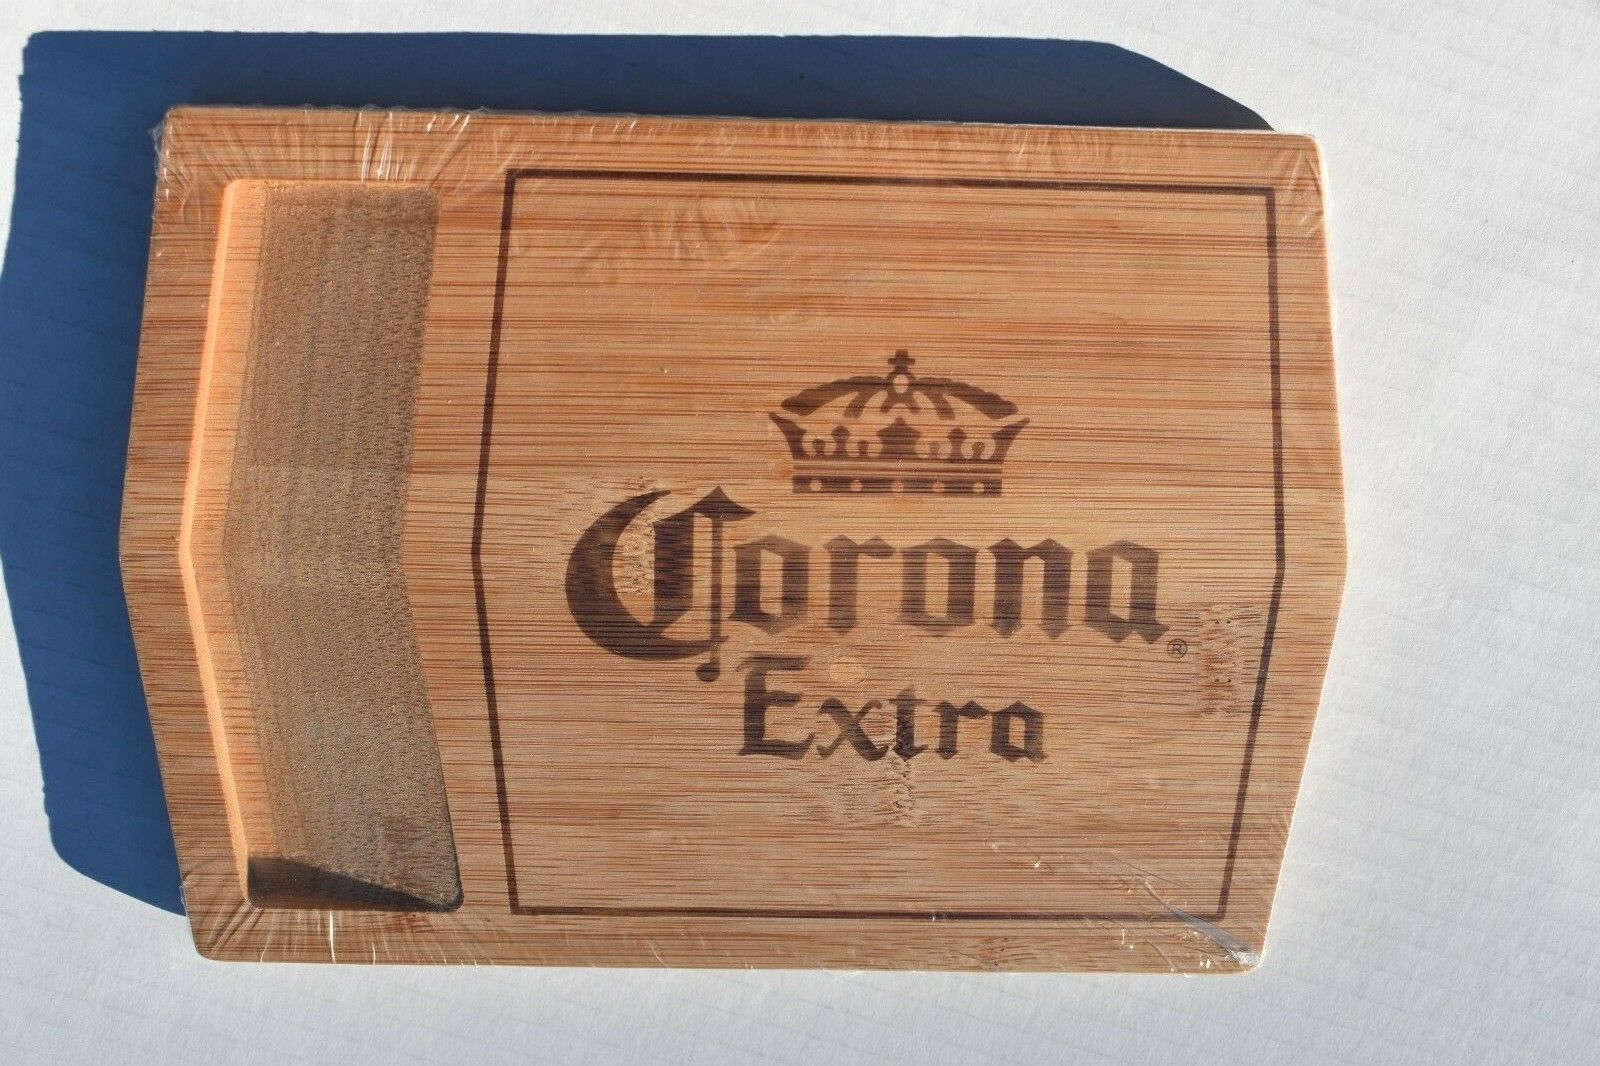 CORONA EXTRA LIME CUTTING BOARD, NEW IN PACKAGE, 